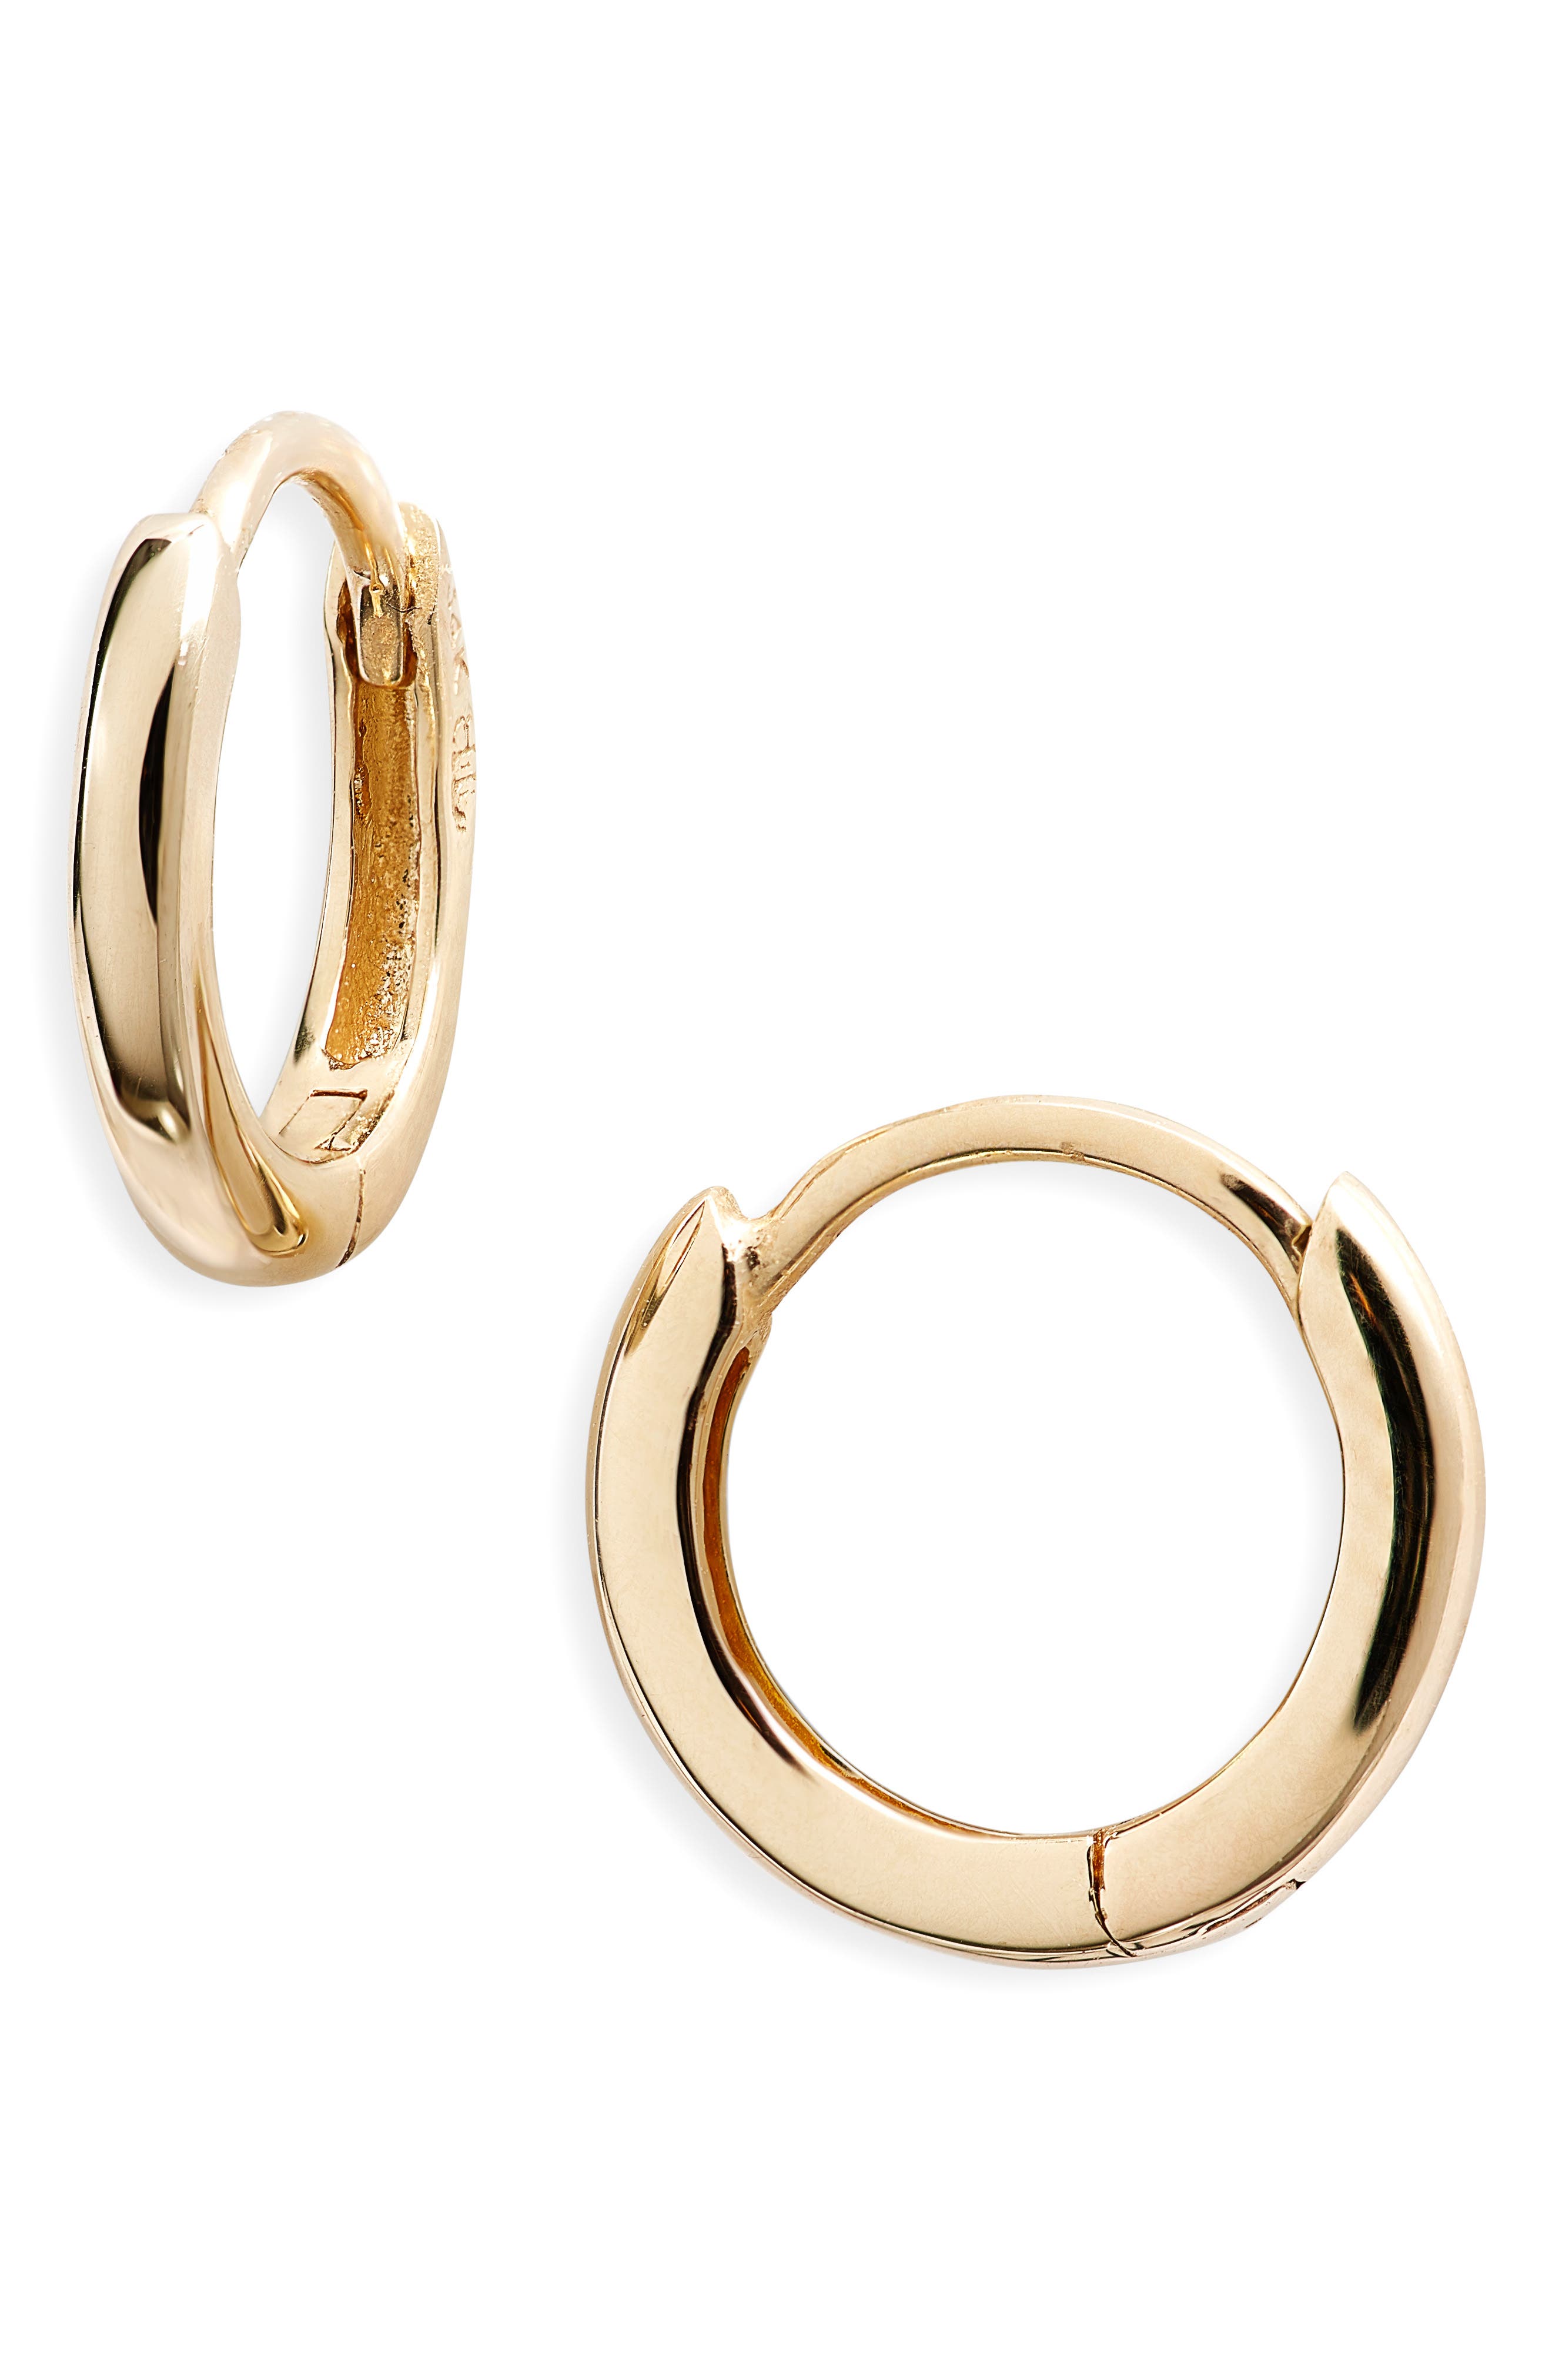 EG34 T&T 14K Gold GP Stainless Steel Thick Hoop Earrings With CZ 